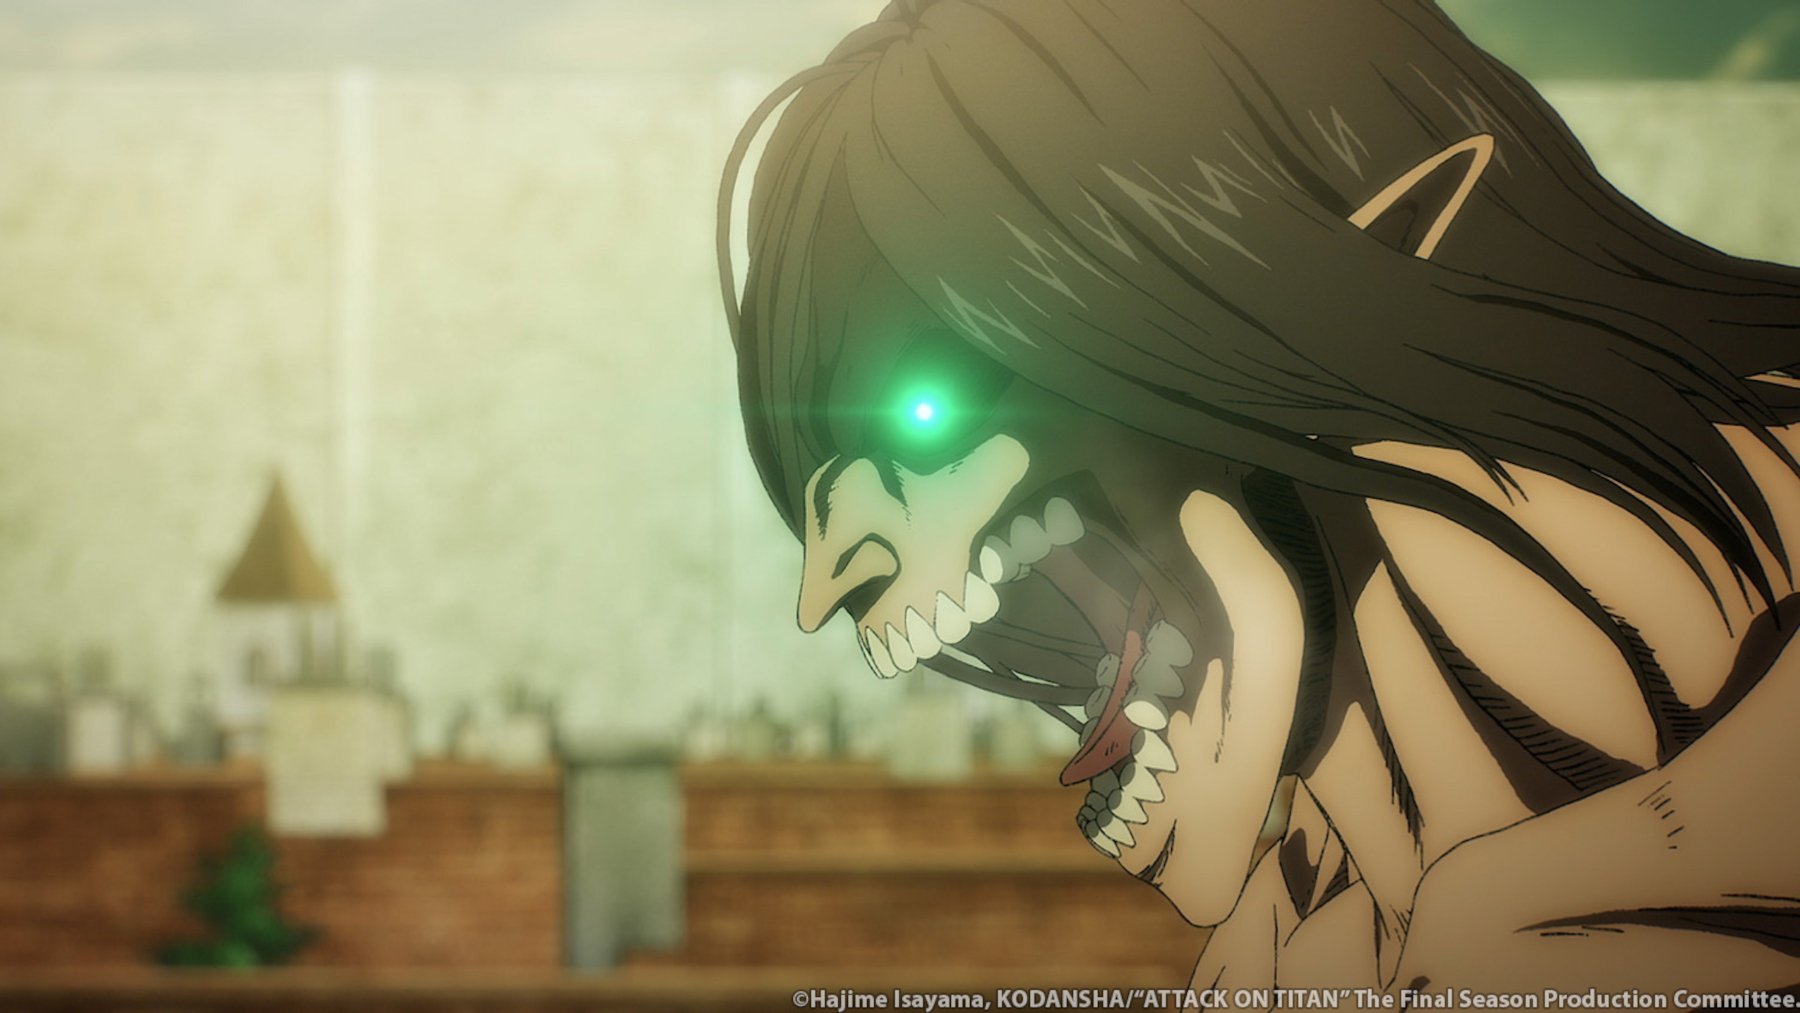 A side profile of Eren Yeager's Titan form in 'Attack on Titan' Season 4 Part 2. His mouth is open, his eyes are glowing, and it looks like he's ready to charge at someone or something.